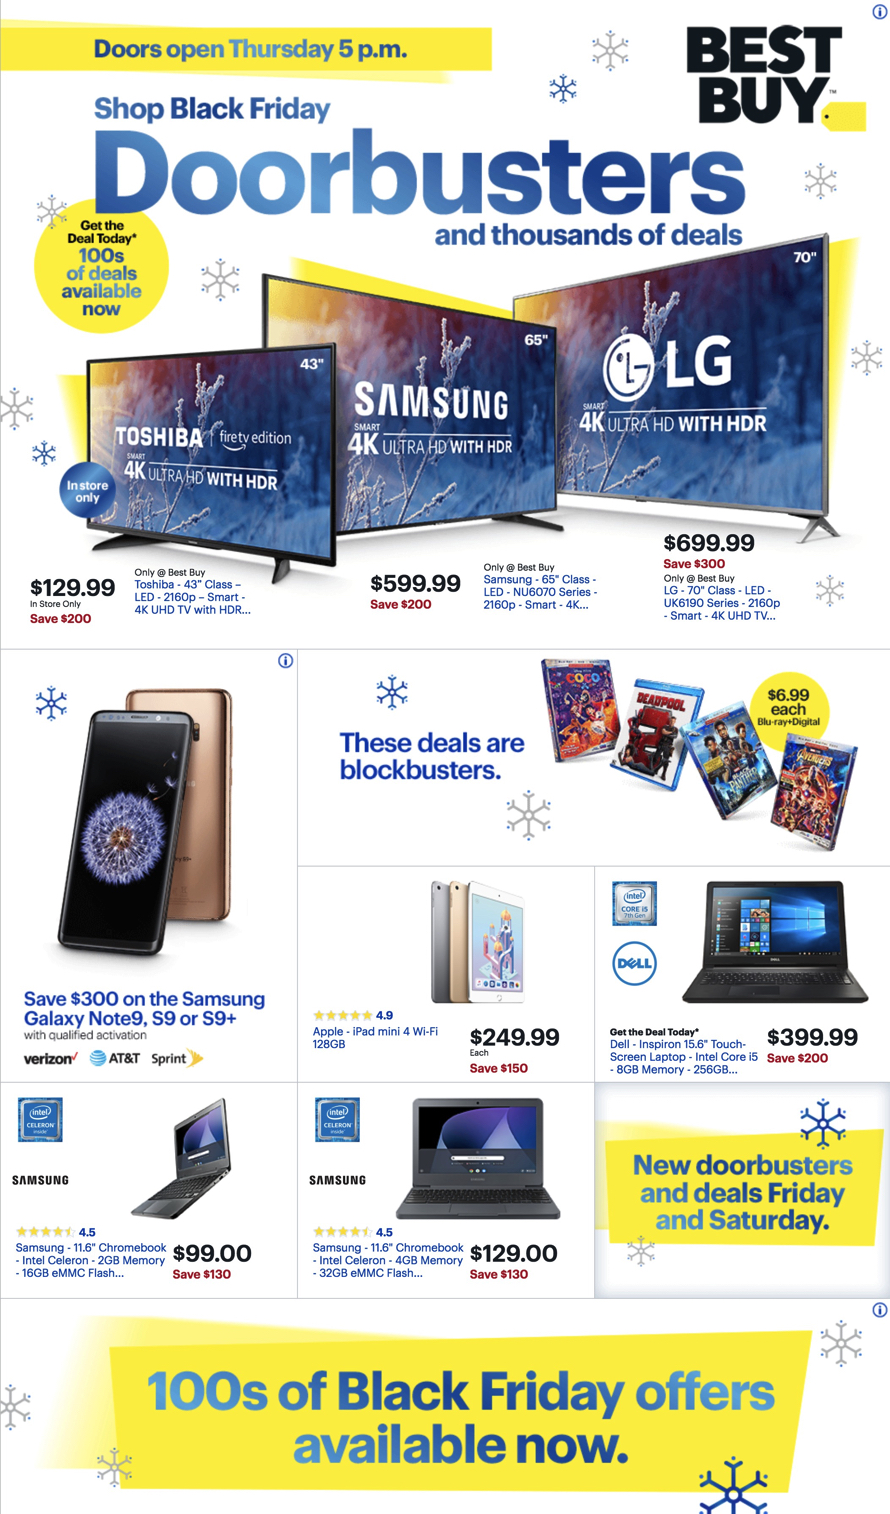 Best Buy Black Friday 2018 Ad, Deals and Store Hours - NerdWallet